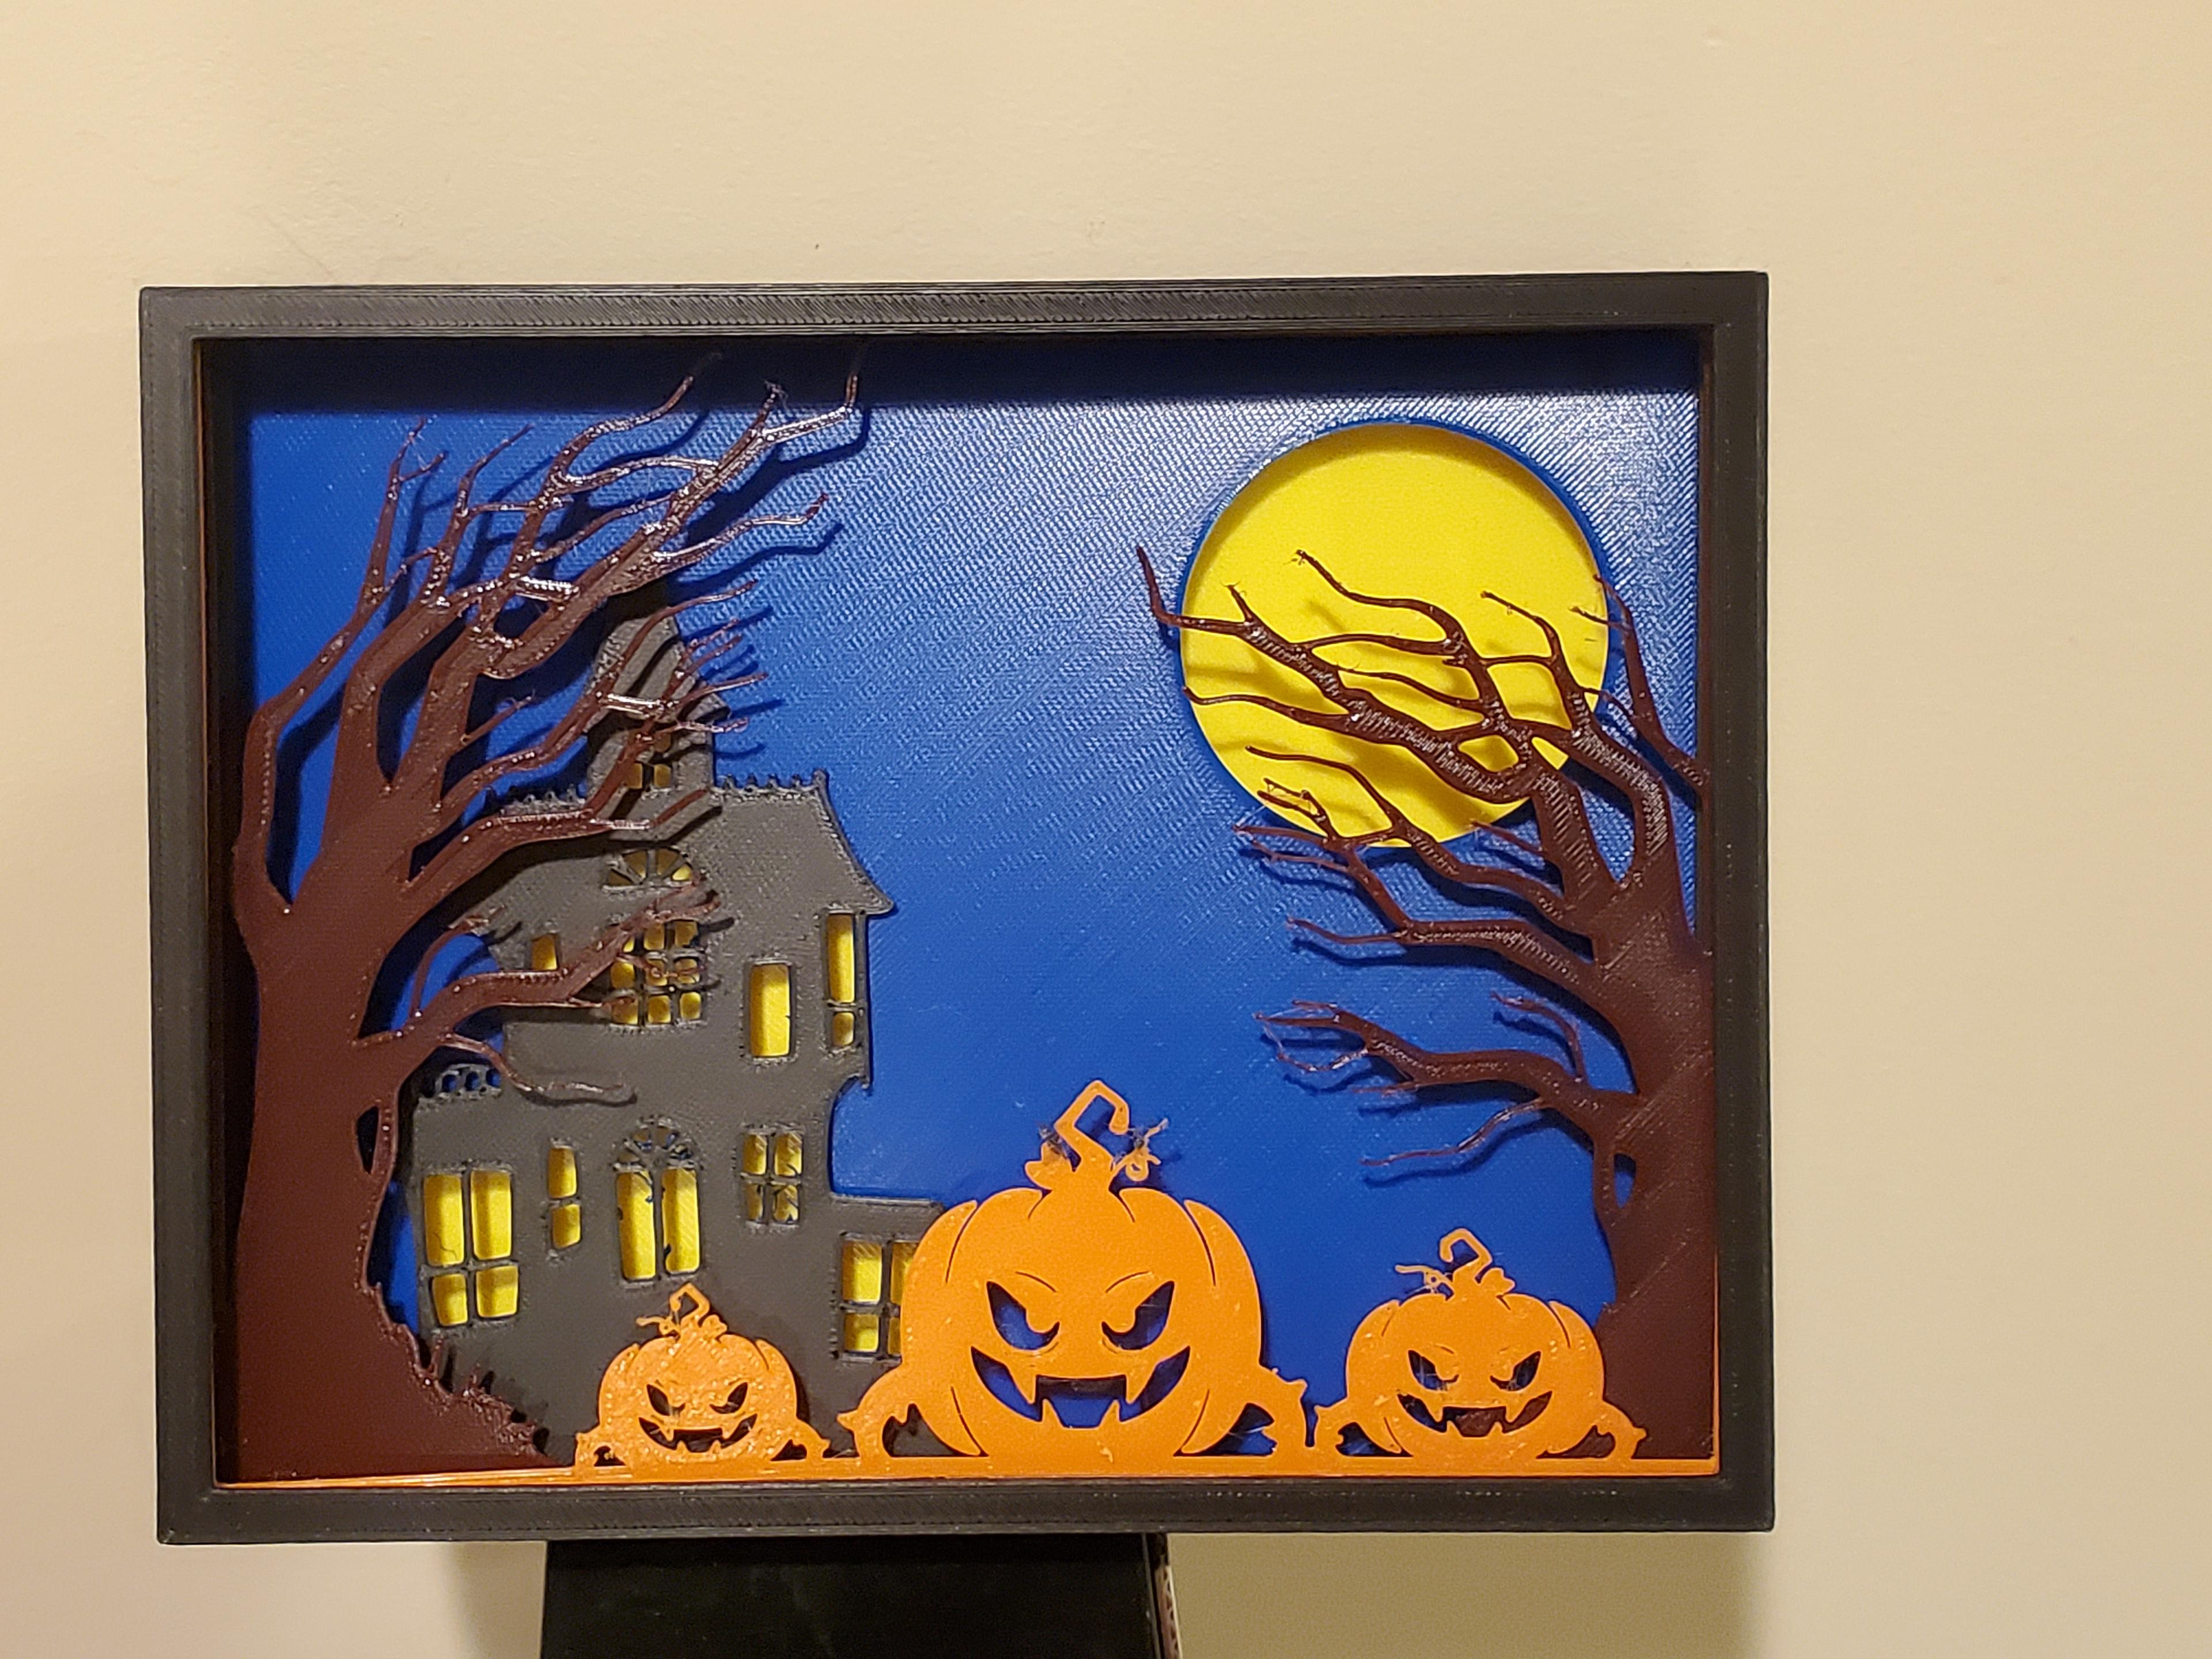 Halloween Multilayer Silhouette - Super cute, fun print. Happy Halloween and thank you! - 3d model